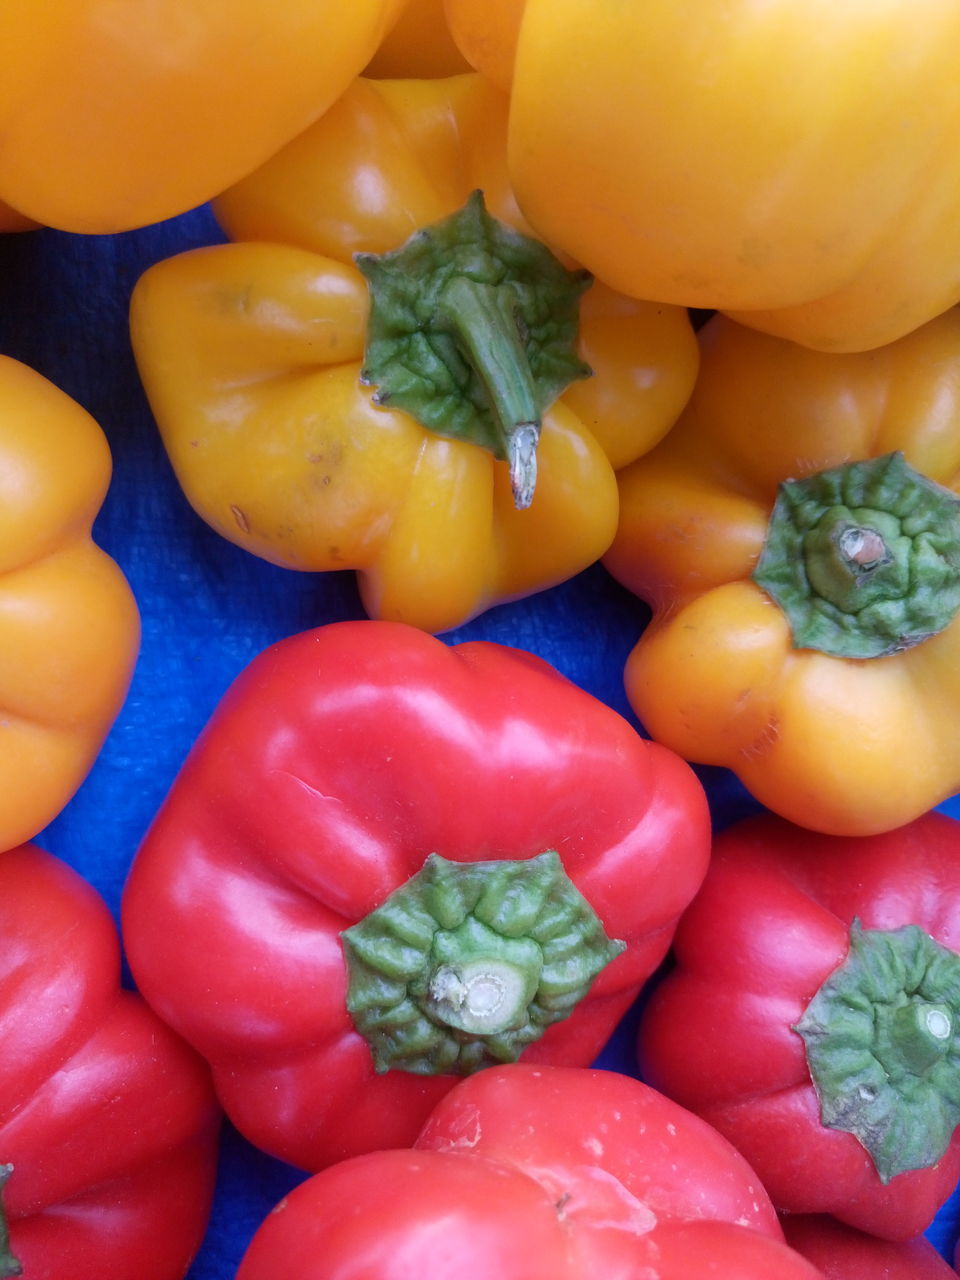 CLOSE-UP OF BELL PEPPERS WITH VEGETABLES AND TOMATOES